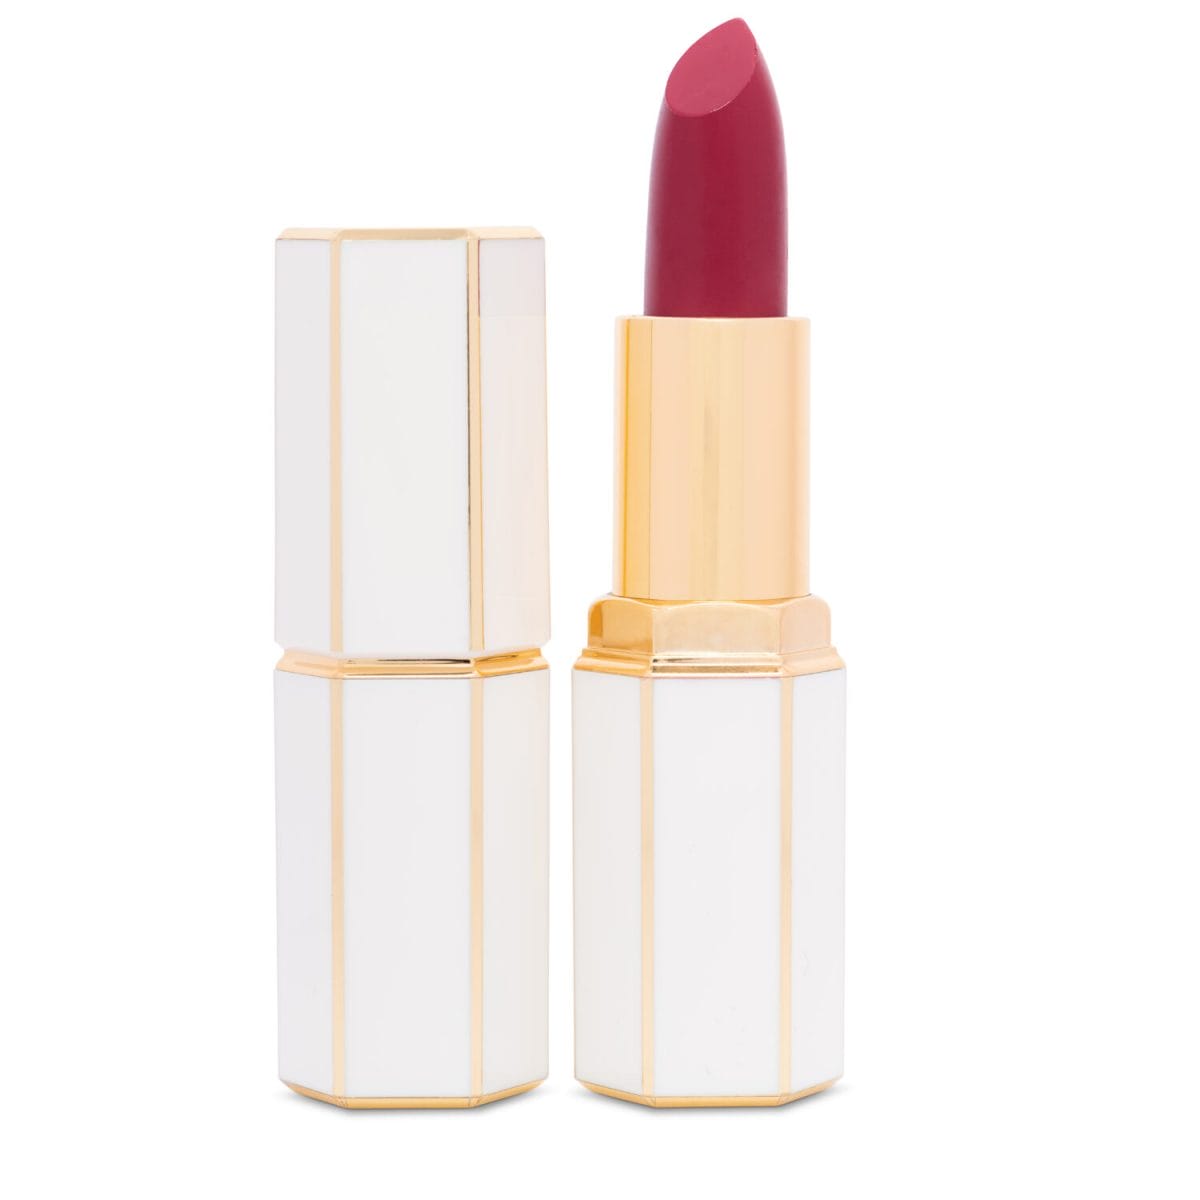 Lipstick Cosmetic Product photo on pure white